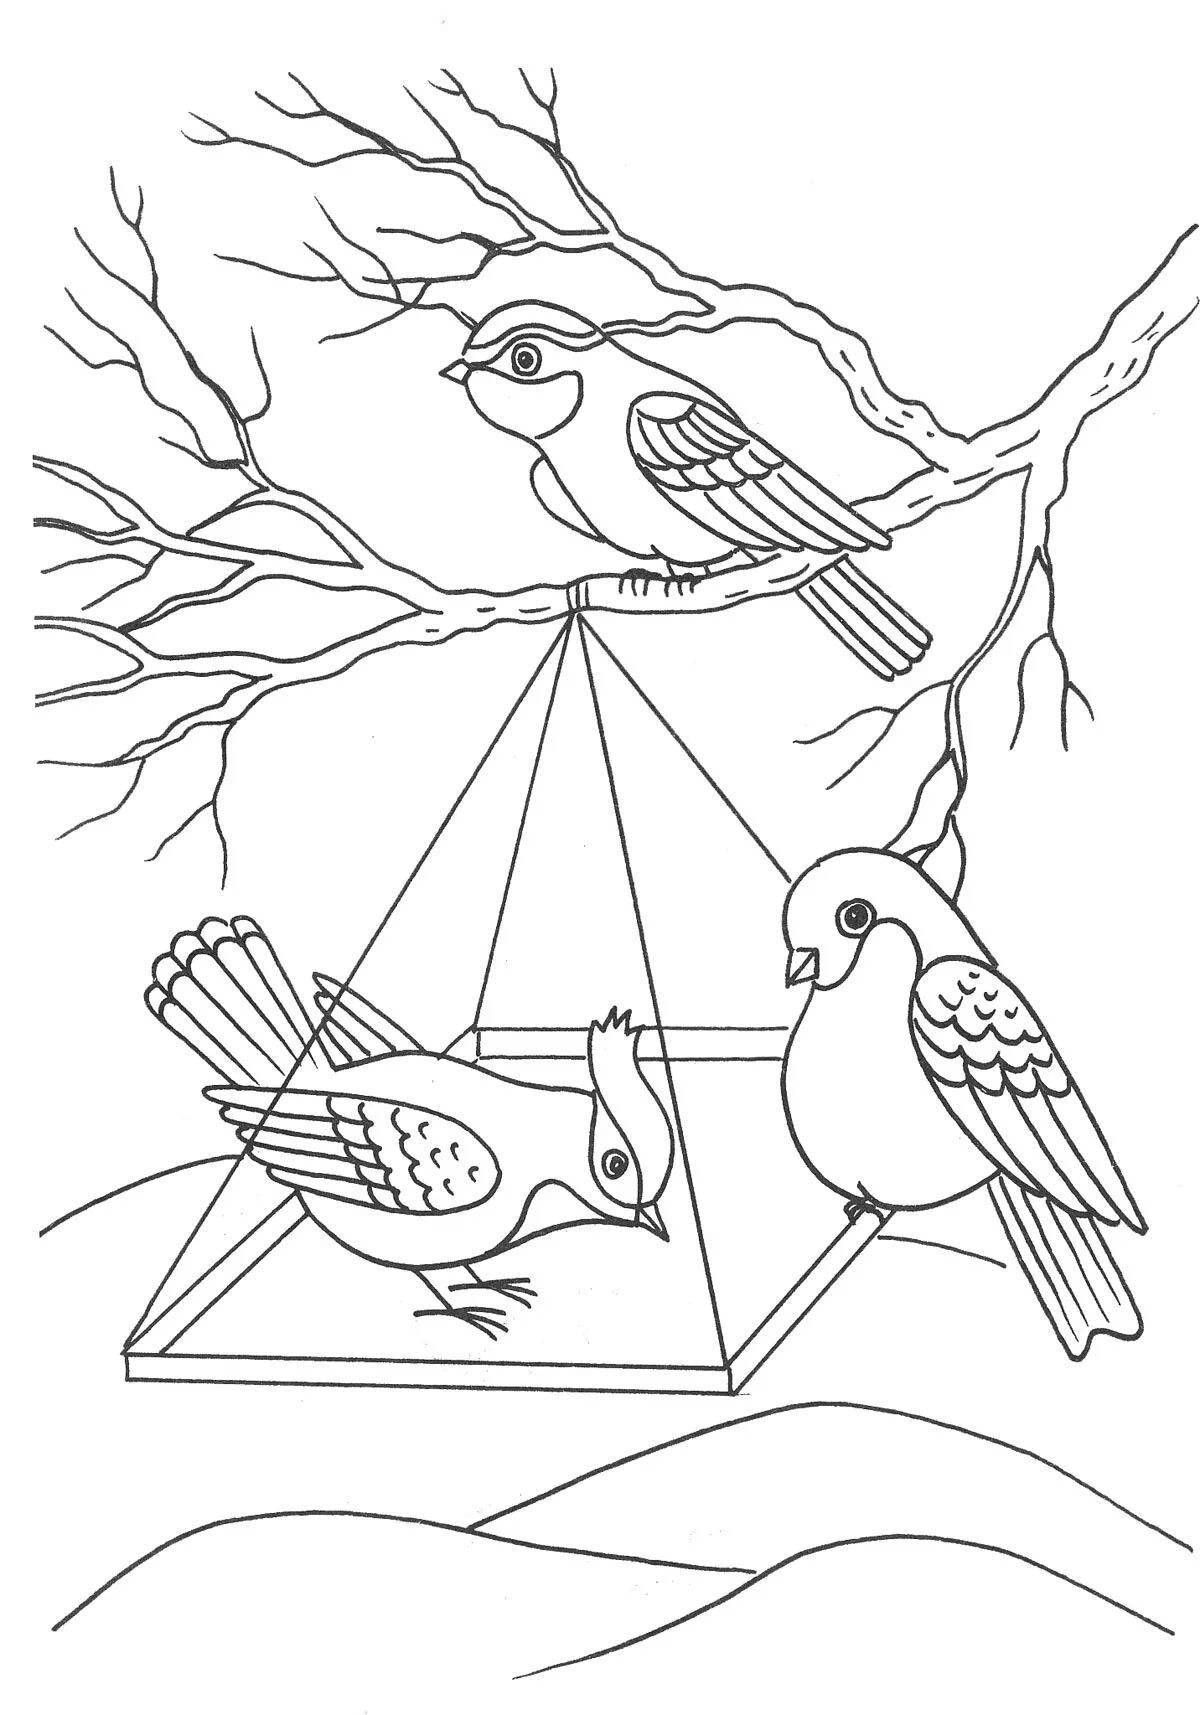 Sparkling bullfinch coloring page